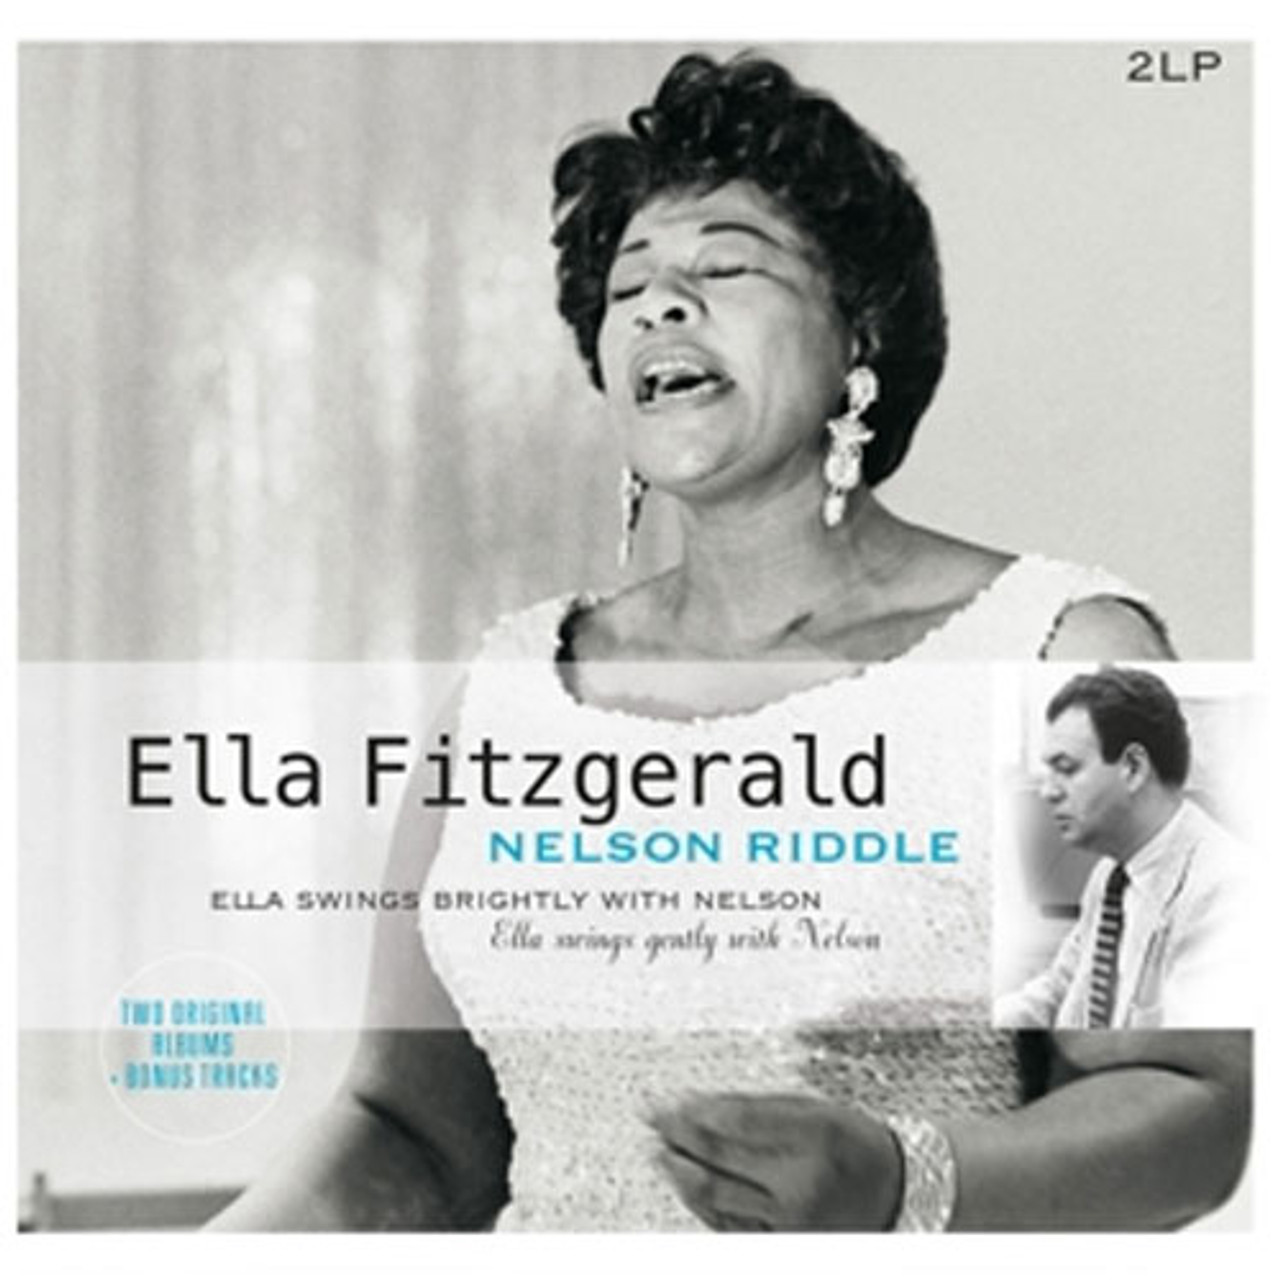 Ella Fitzgerald and Louis Armstrong - Ella and Louis (180g Import Vinyl LP)  * * * - Music Direct